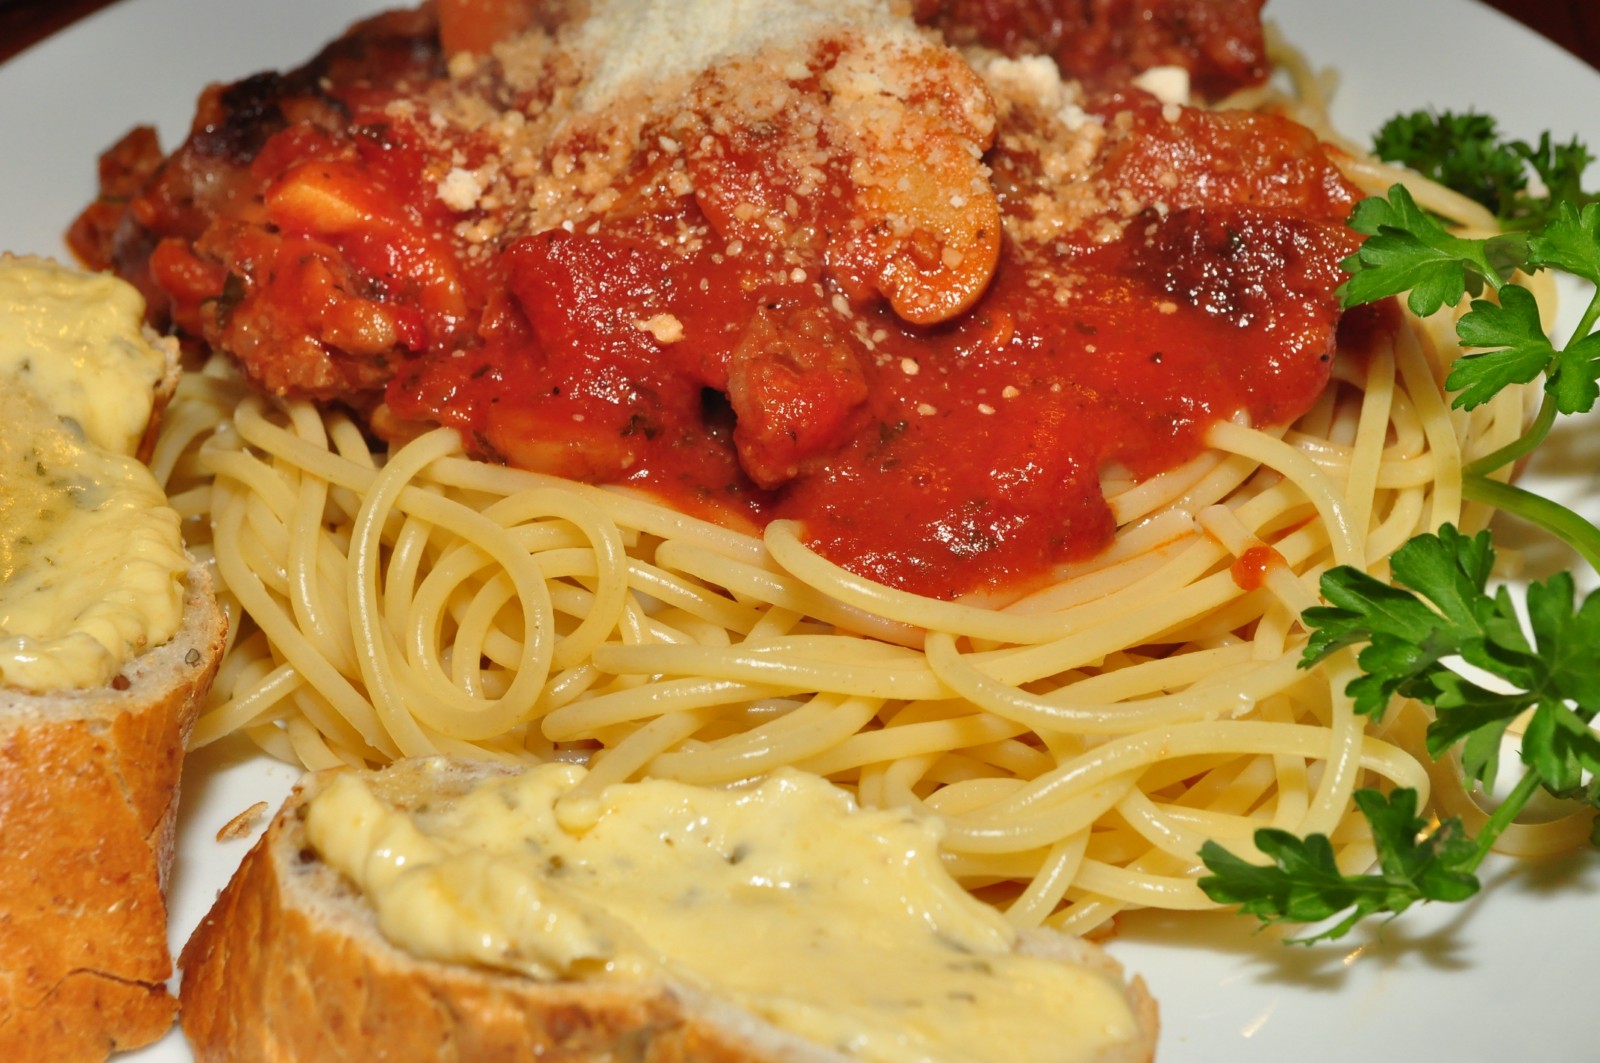 the plate has noodles, meatballs and bread on it